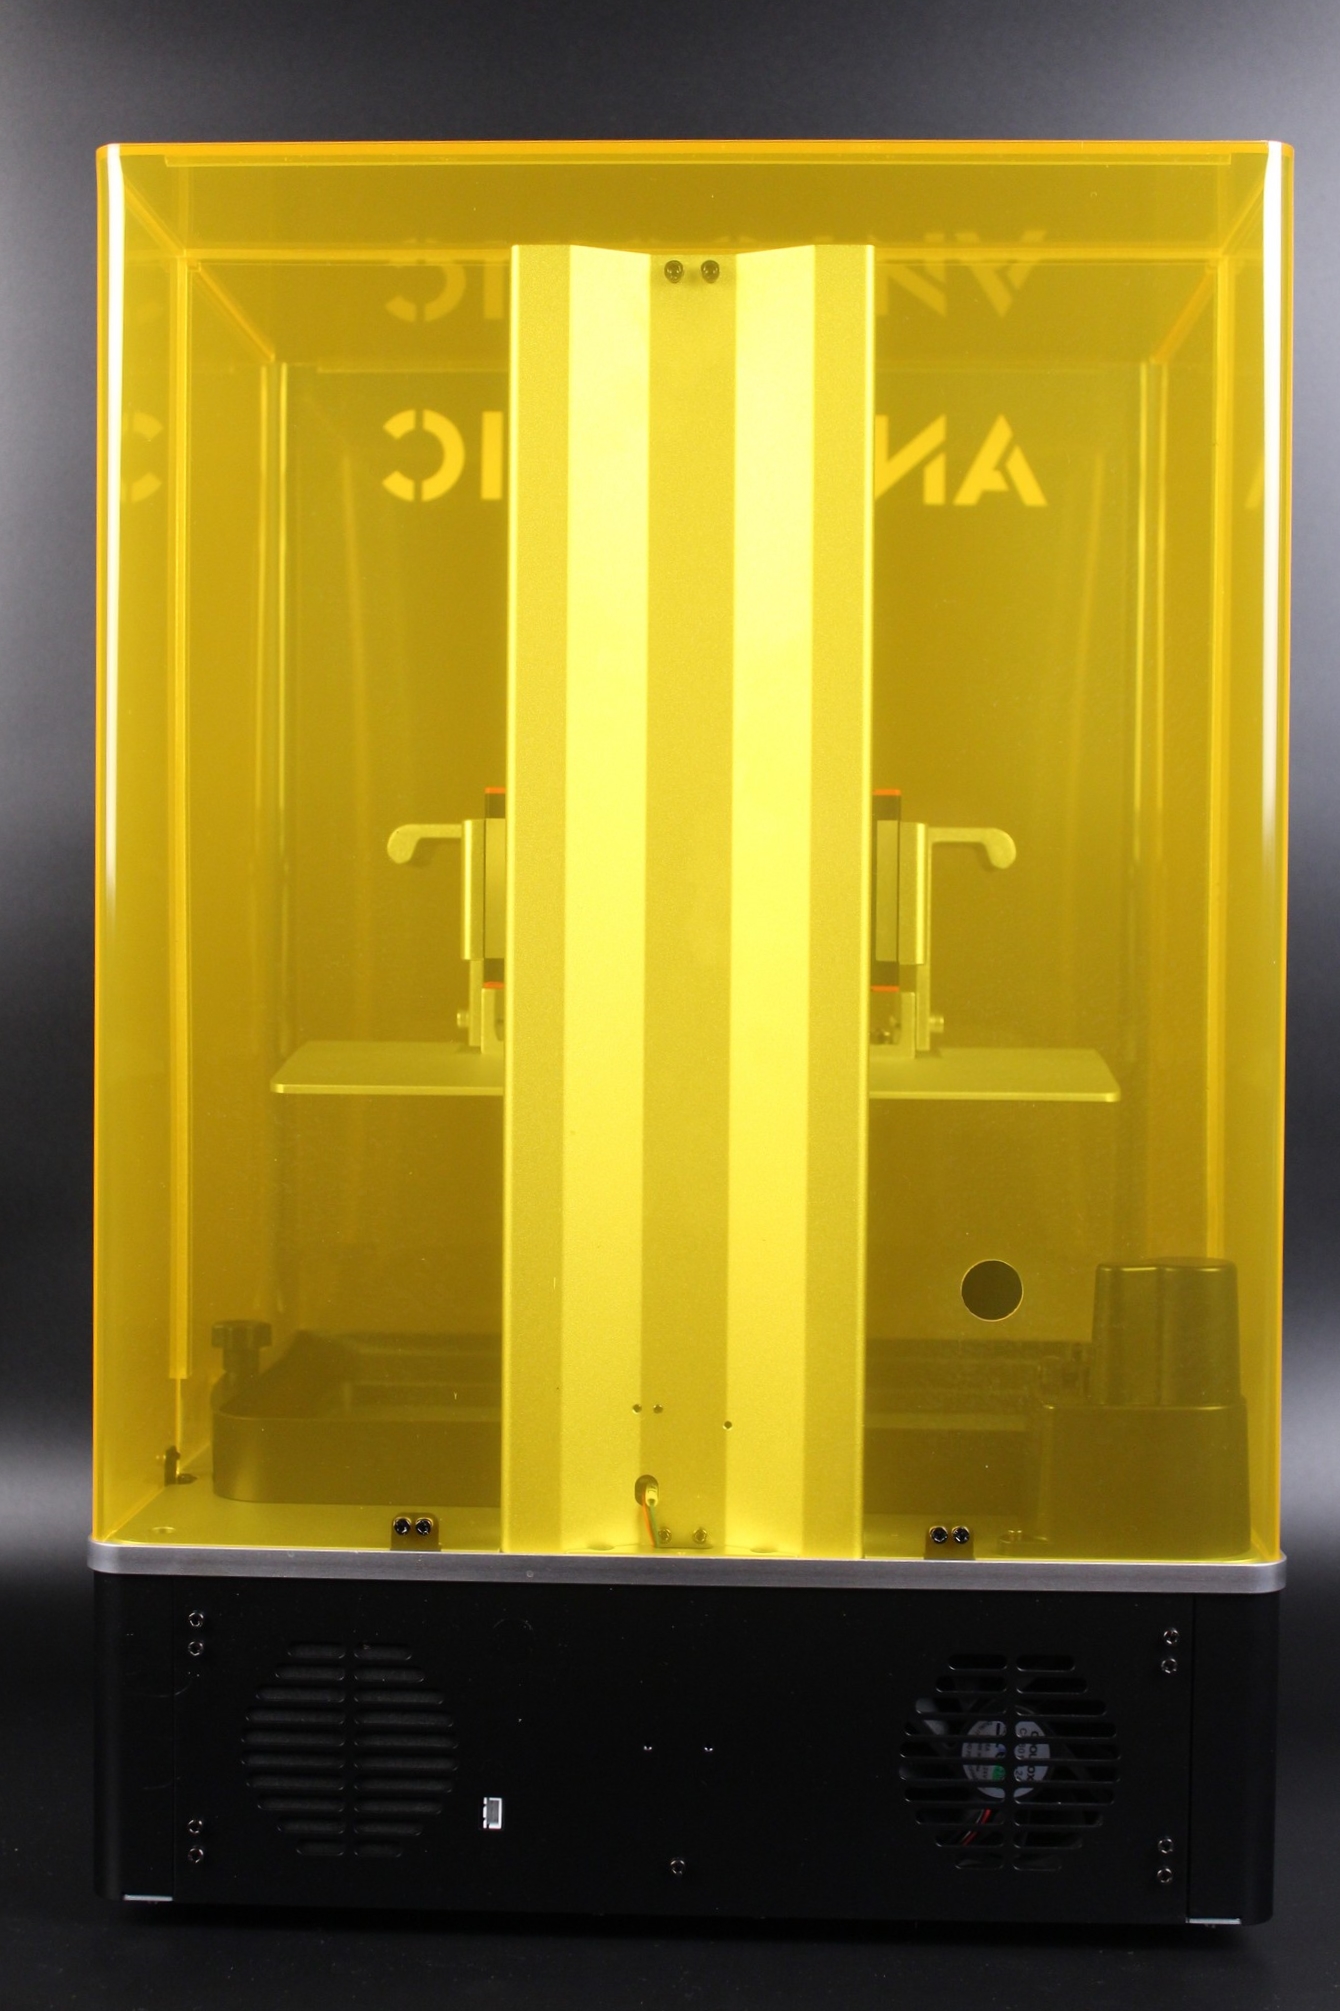 Anycubic Photon M3 Max Review Design 4 | Anycubic Photon M3 Max Review: Who Needs FDM Anymore?